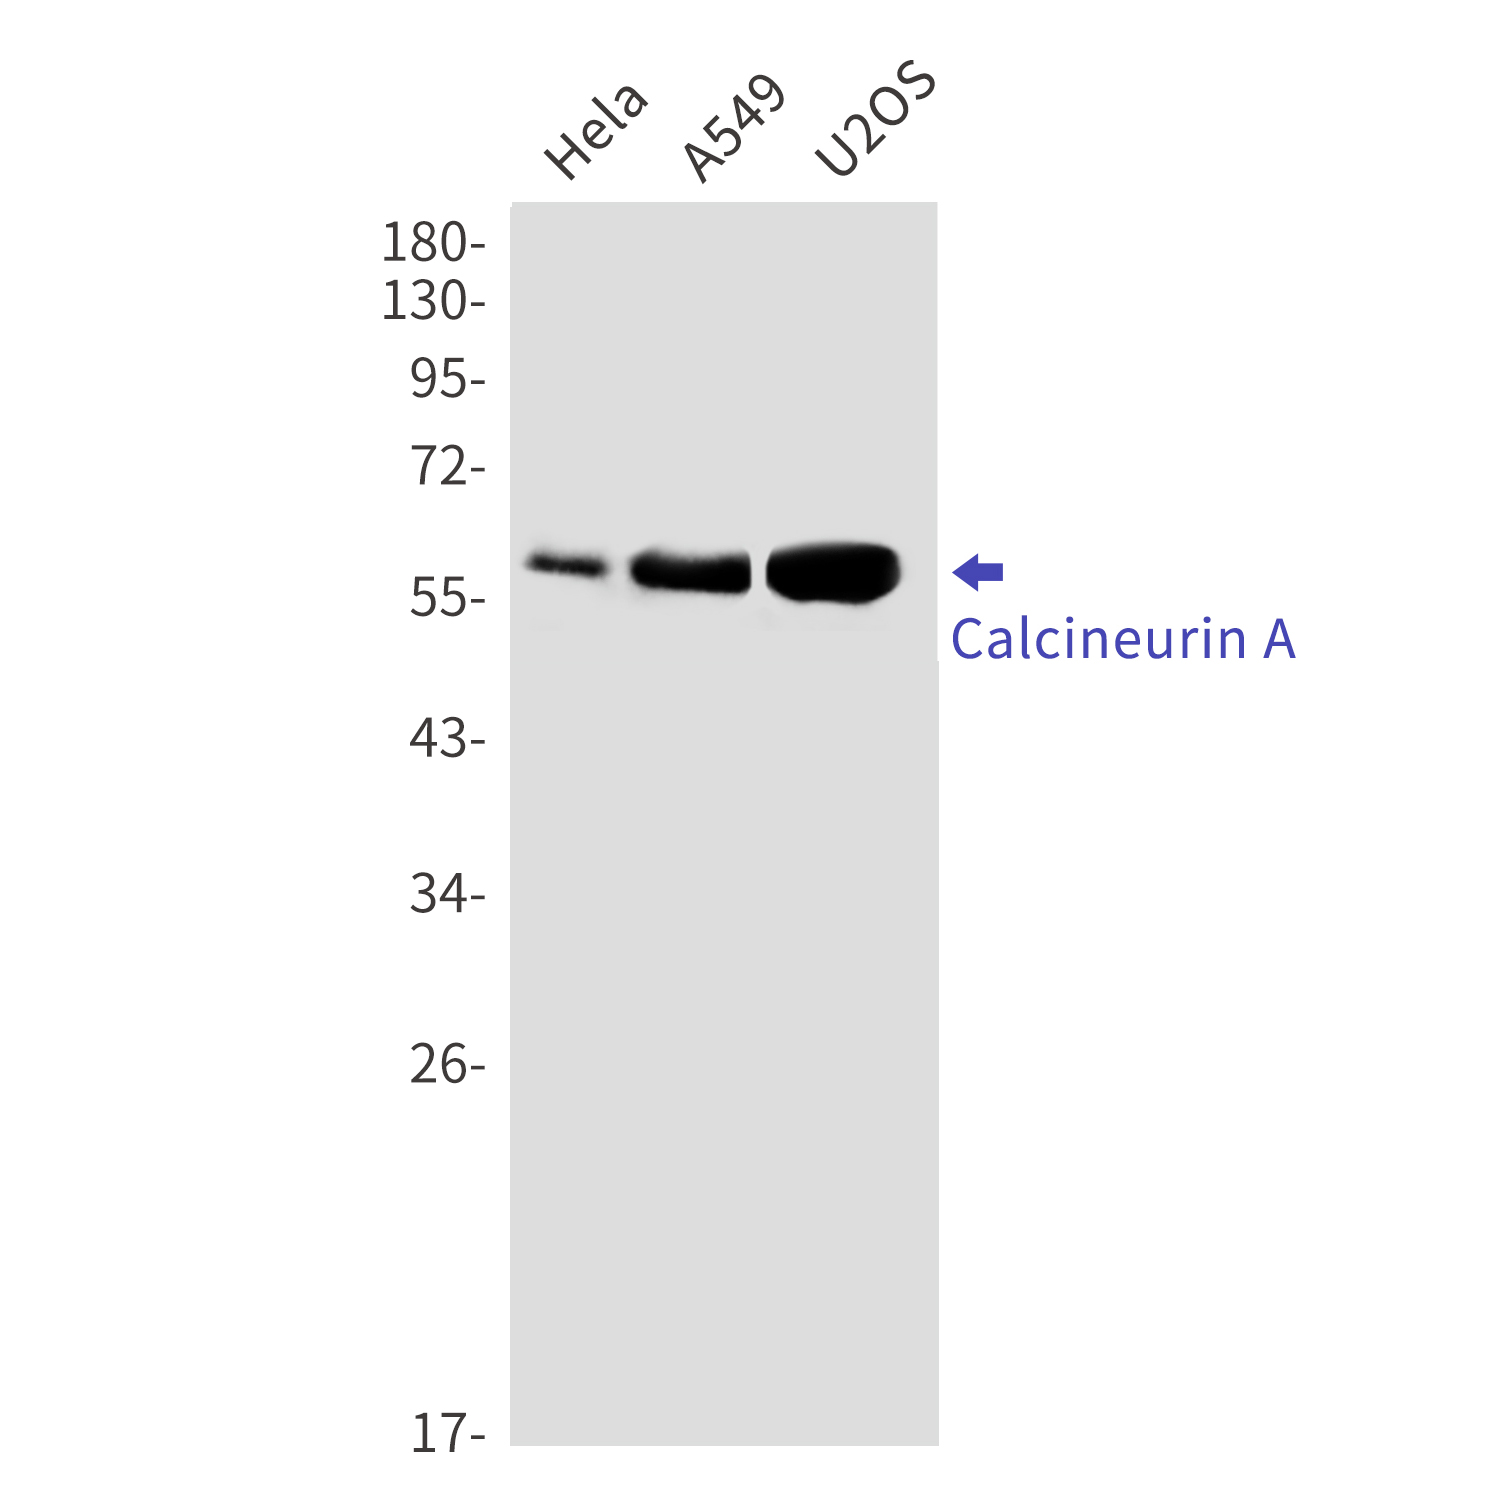 Western blot detection of Calcineurin A in Hela,A549,U2OS cell lysates using Calcineurin A Rabbit mAb(1:1000 diluted).Predicted band size:59kDa.Observed band size:59kDa.